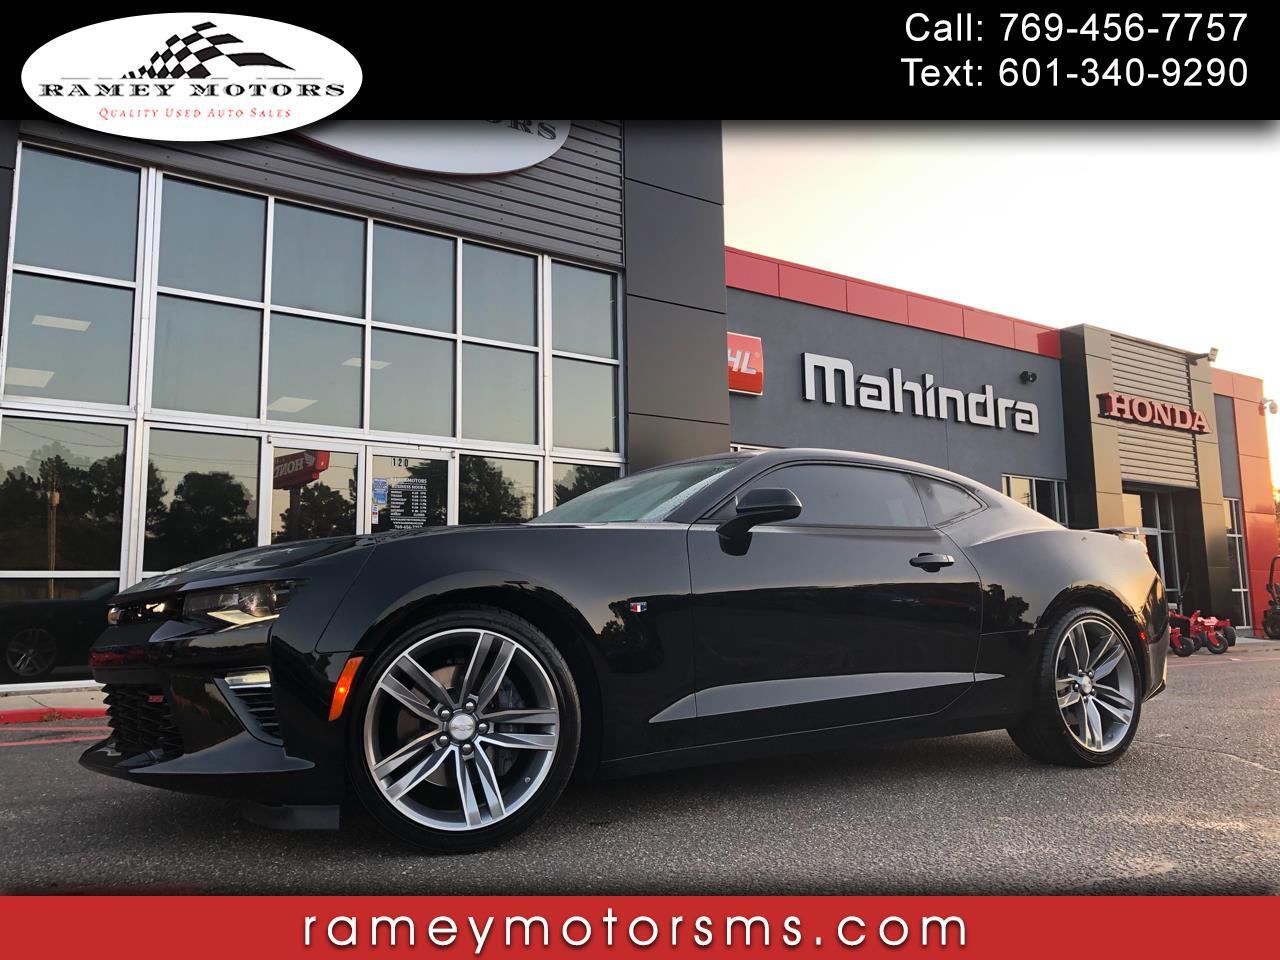 Used 2017 Chevrolet Camaro Coupe Ss 50th Anniversary Edition